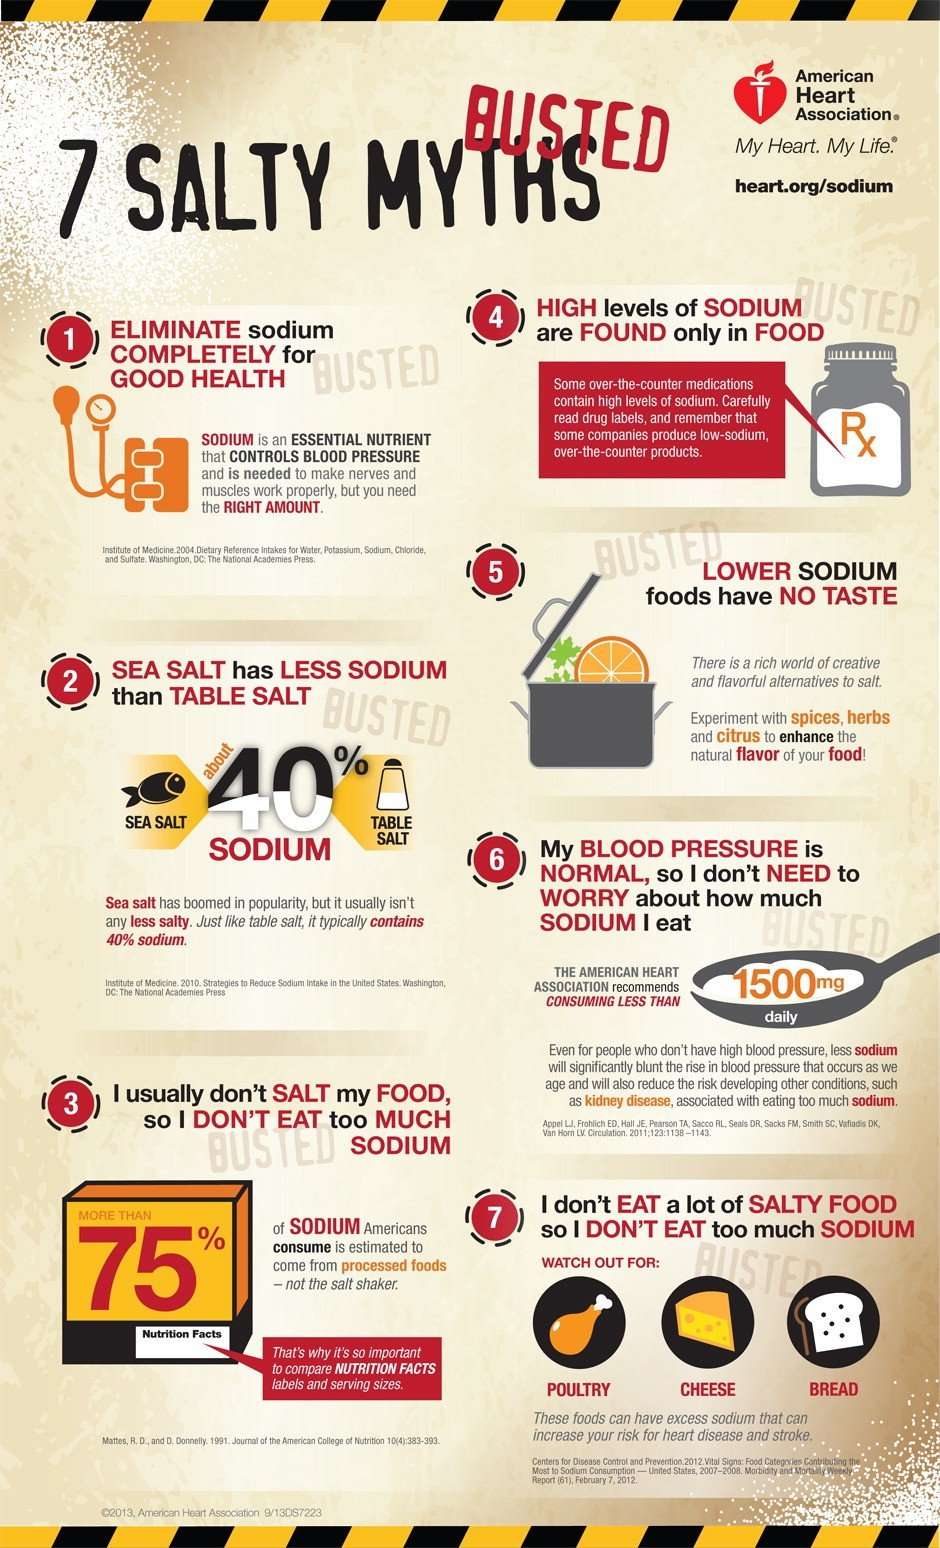 How Much Sodium Is Too Much?